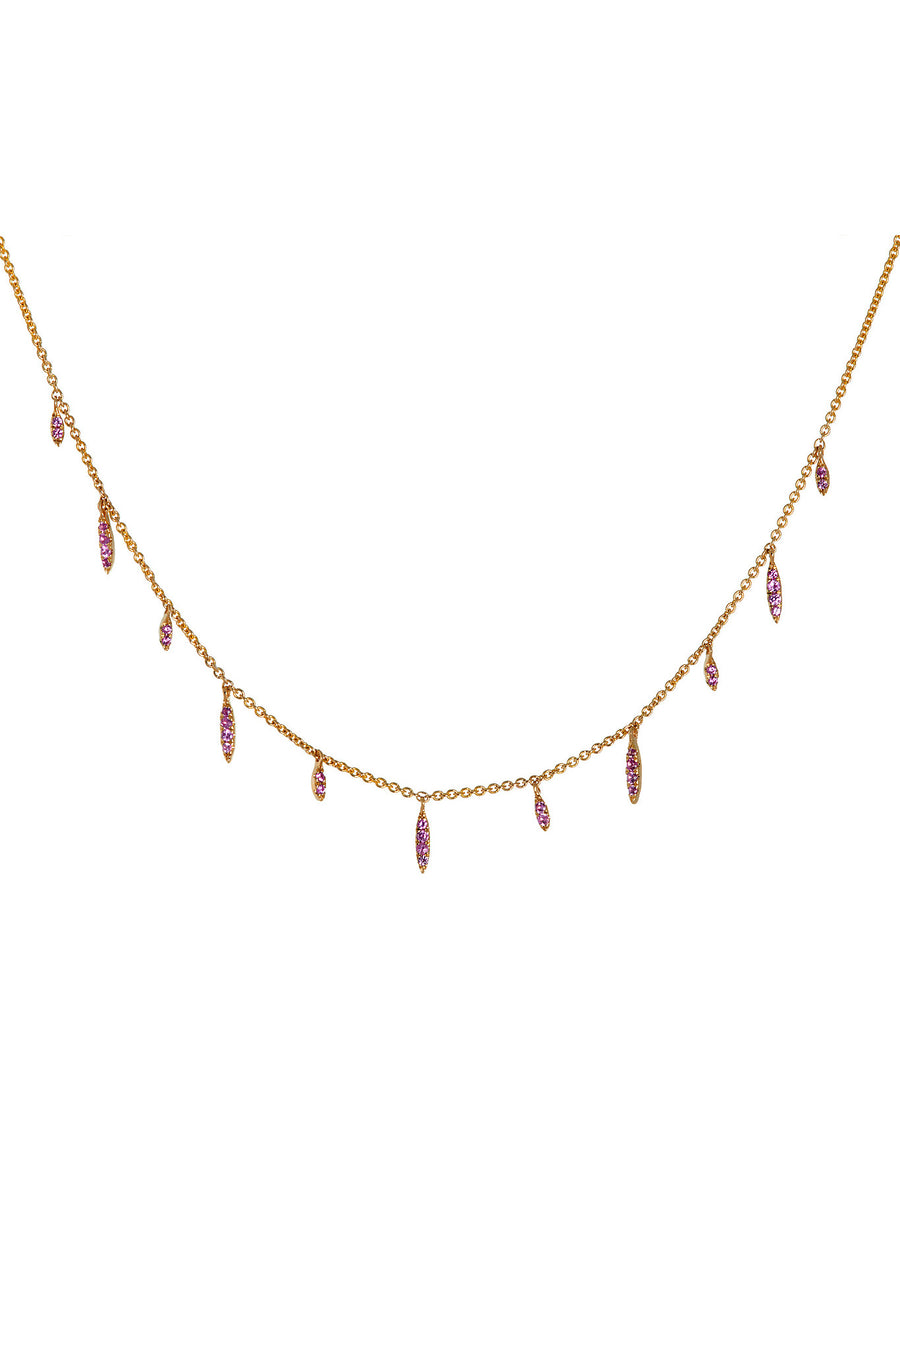 Multi-diamond dangle necklace in 14k gold and pink sapphires